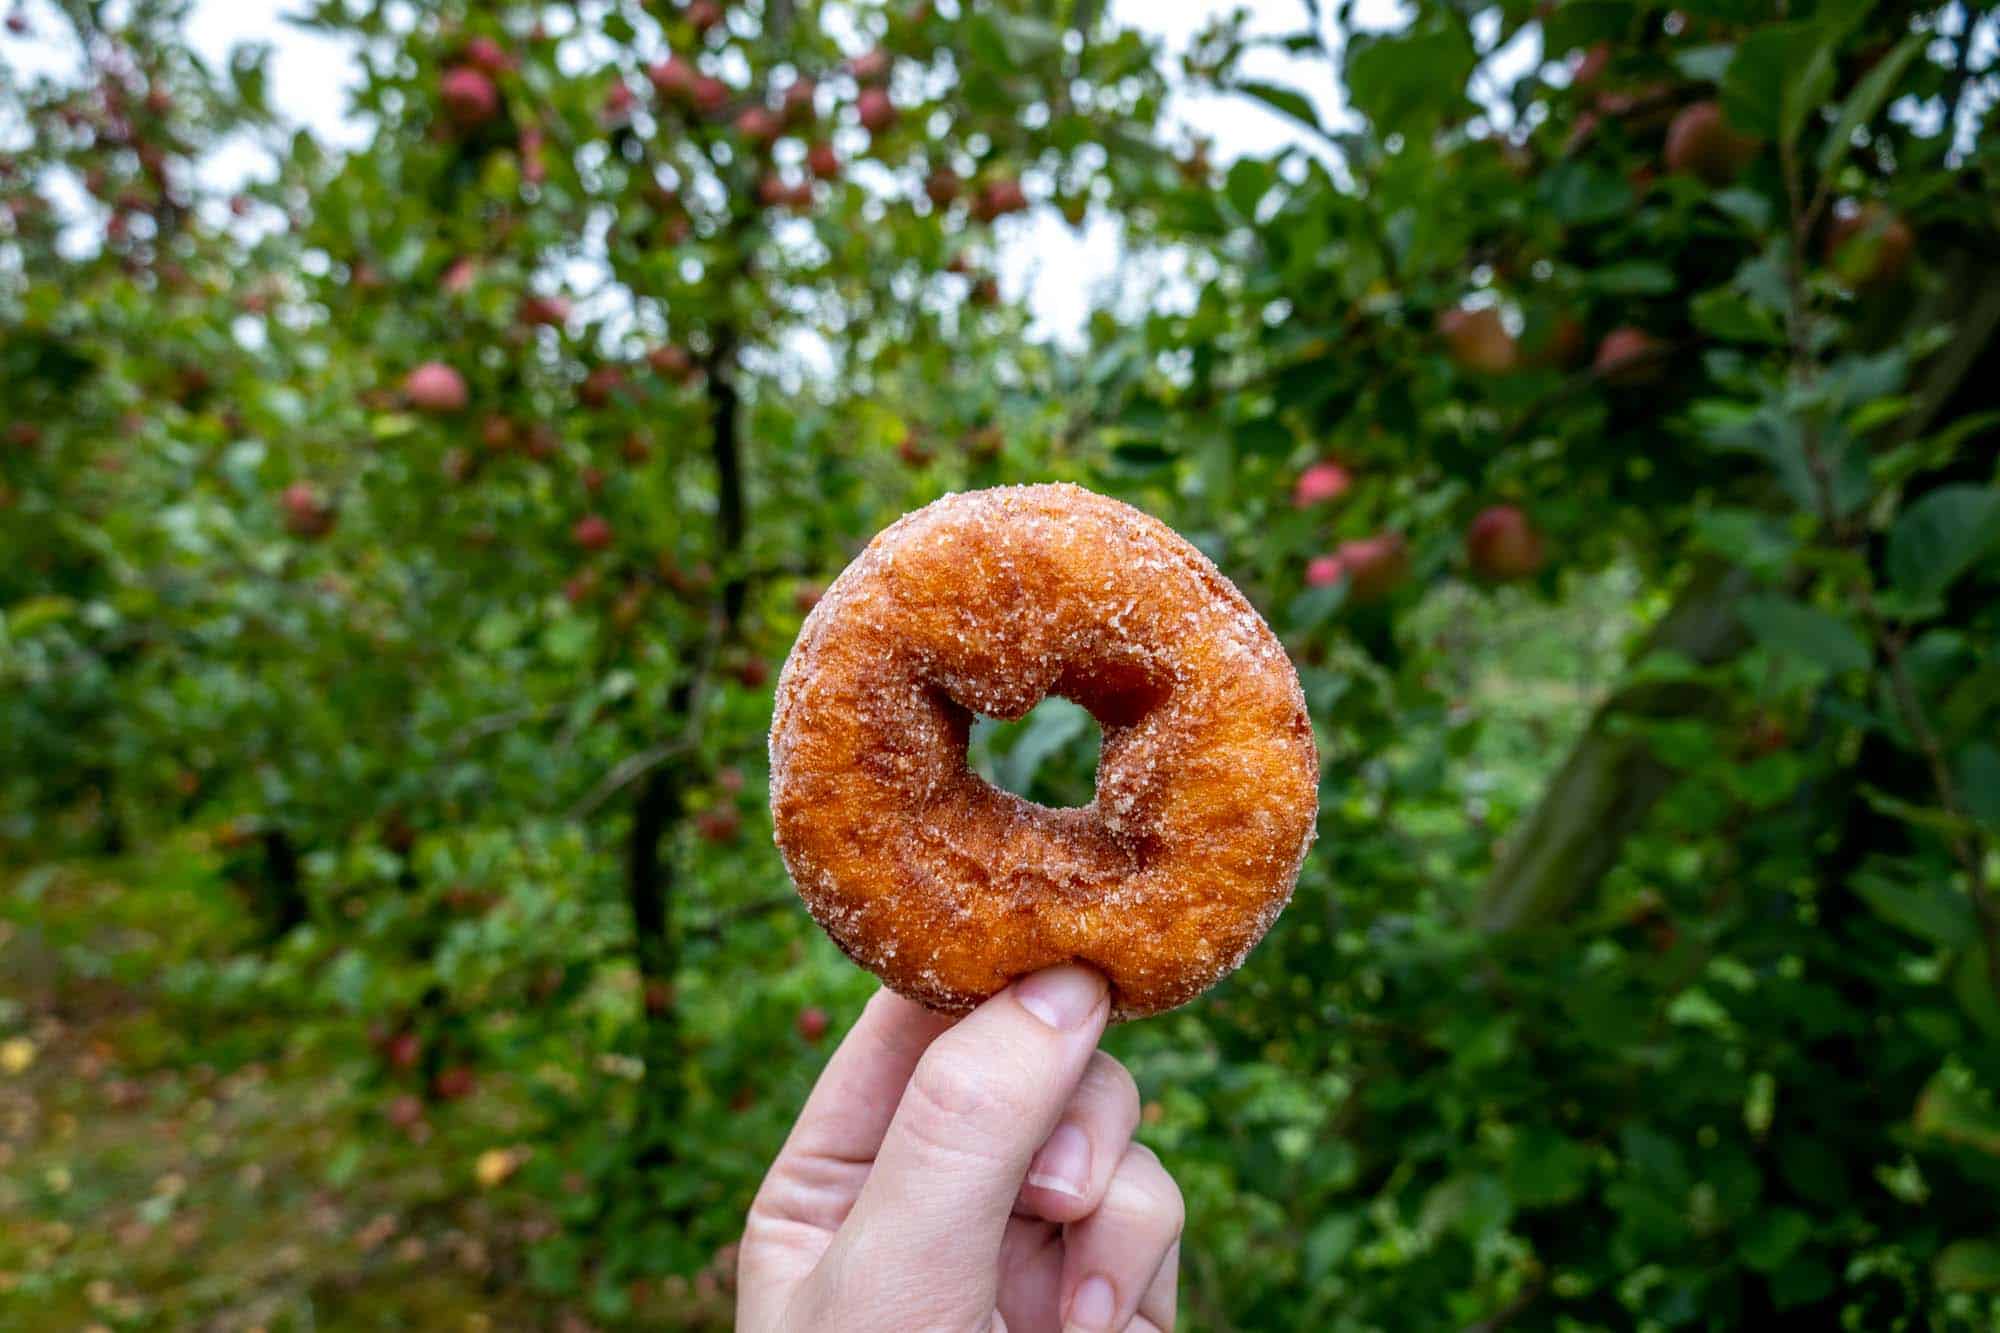 Hand holding a donut in front of apple trees